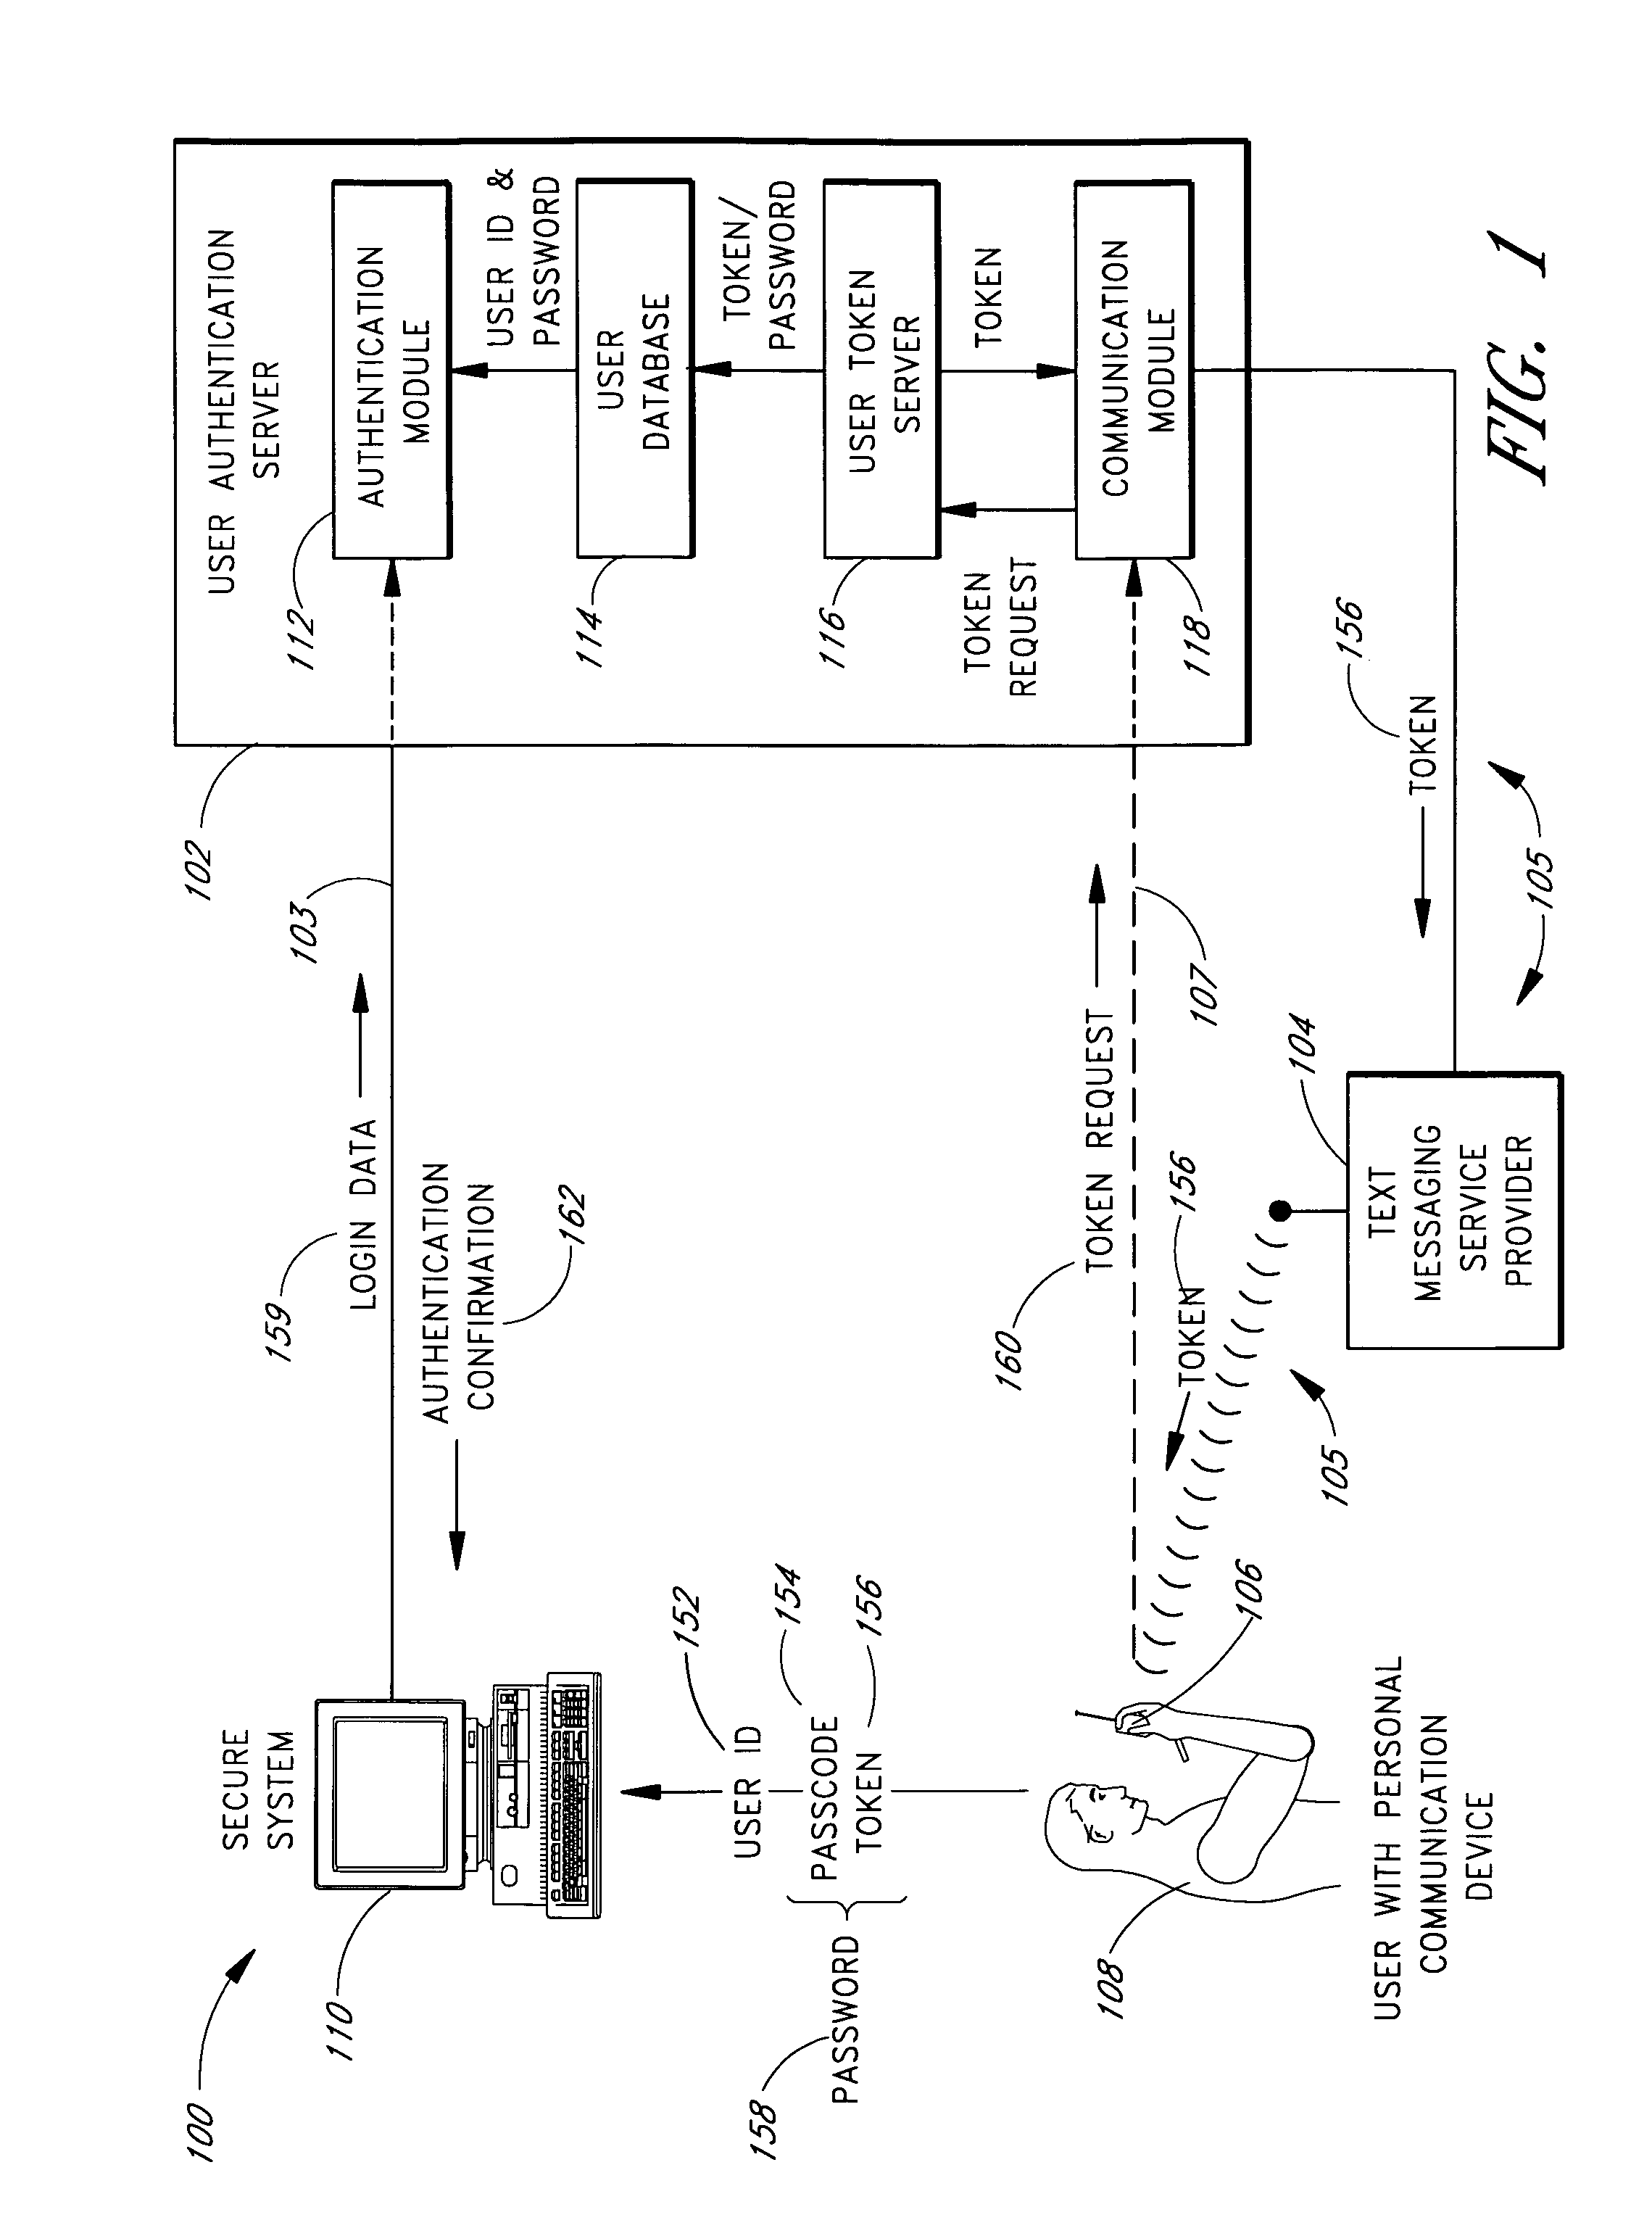 Use of personal communication devices for user authentication